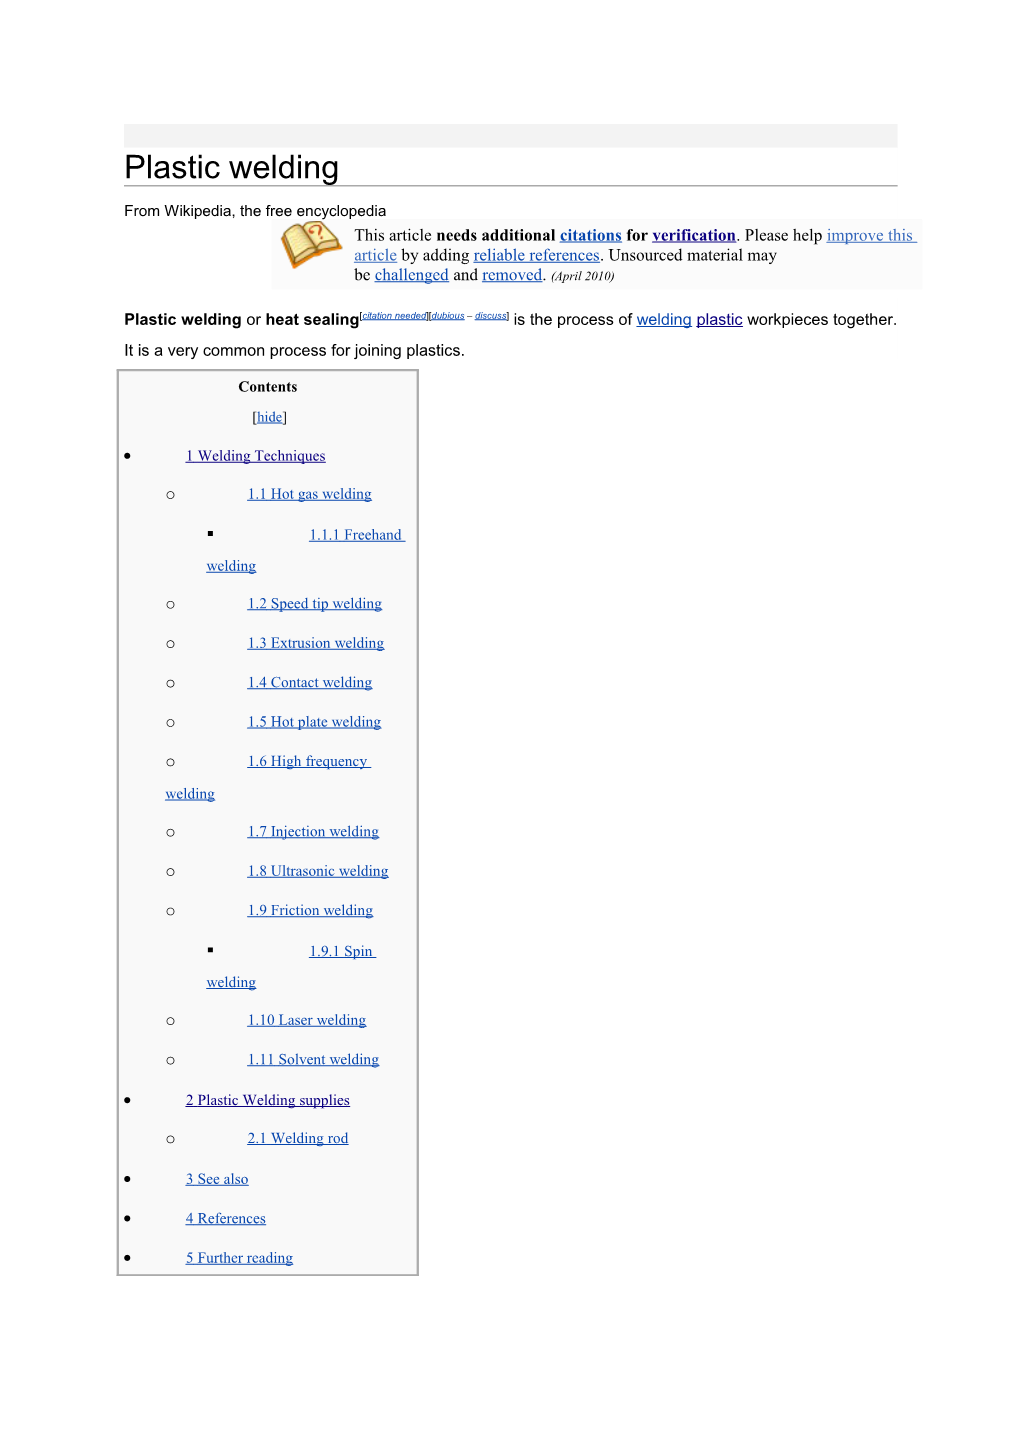 From Wikipedia, the Free Encyclopedia s16